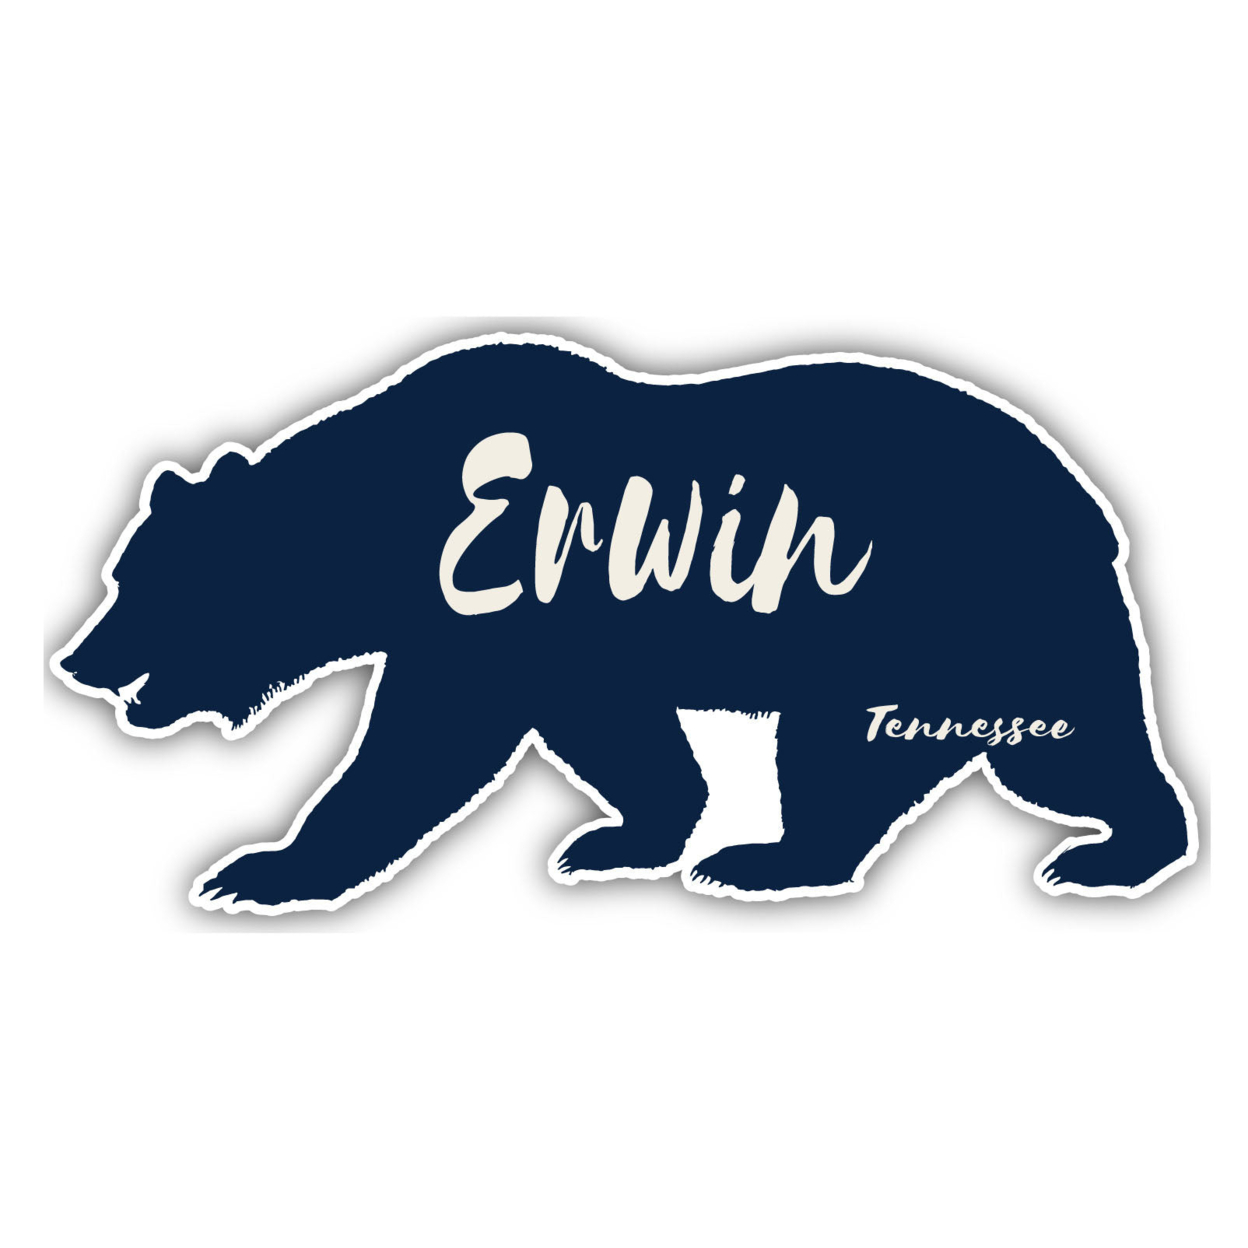 Erwin Tennessee Souvenir Decorative Stickers (Choose Theme And Size) - 4-Pack, 12-Inch, Bear